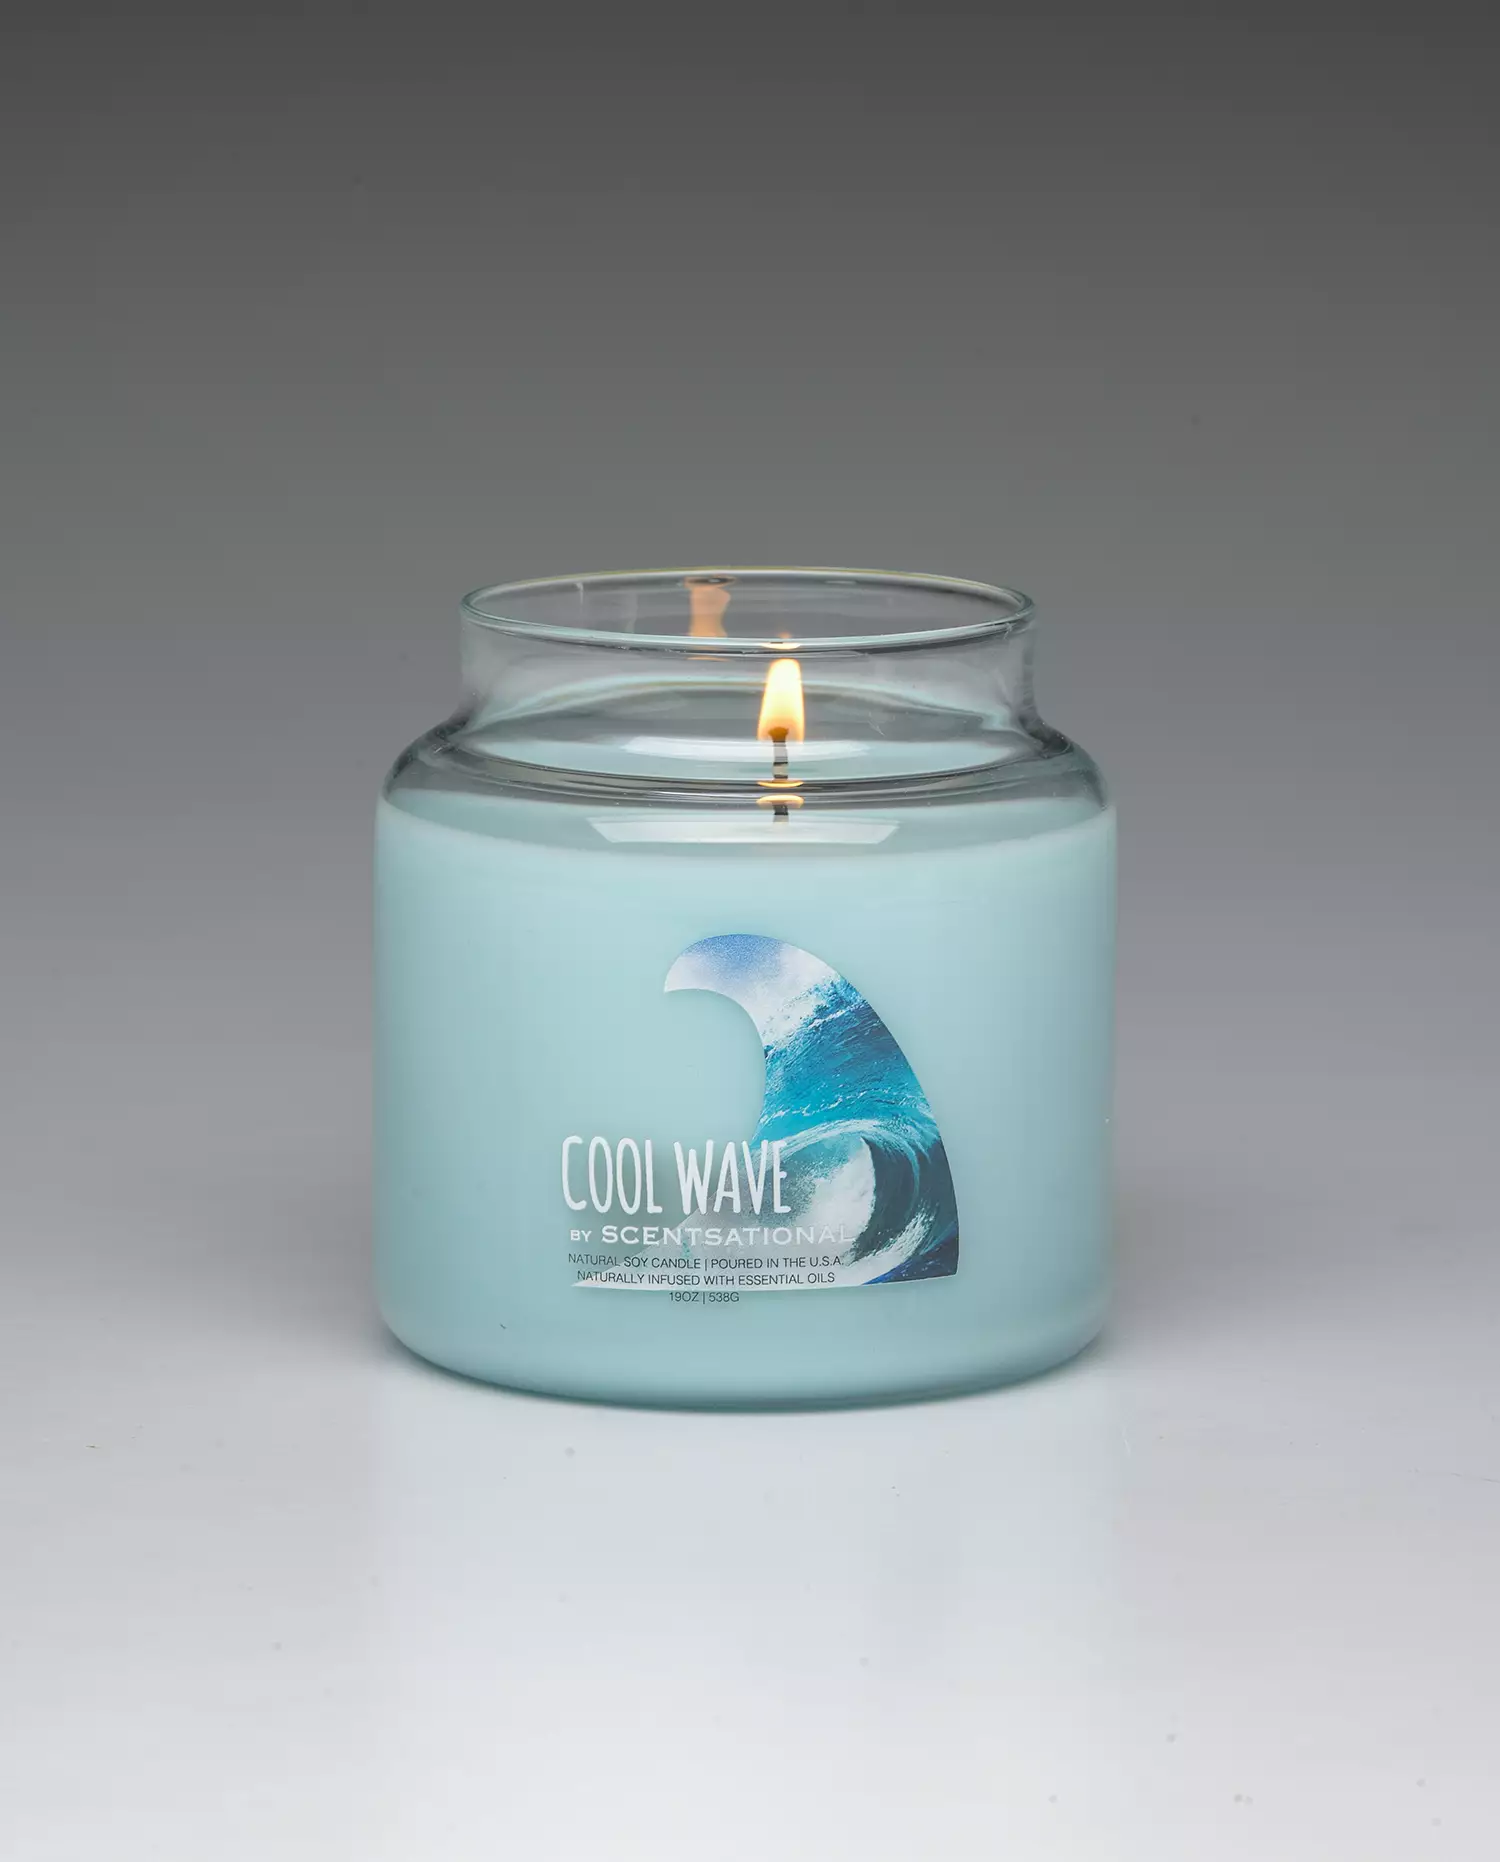 Cool Wave 19oz scented candle burning